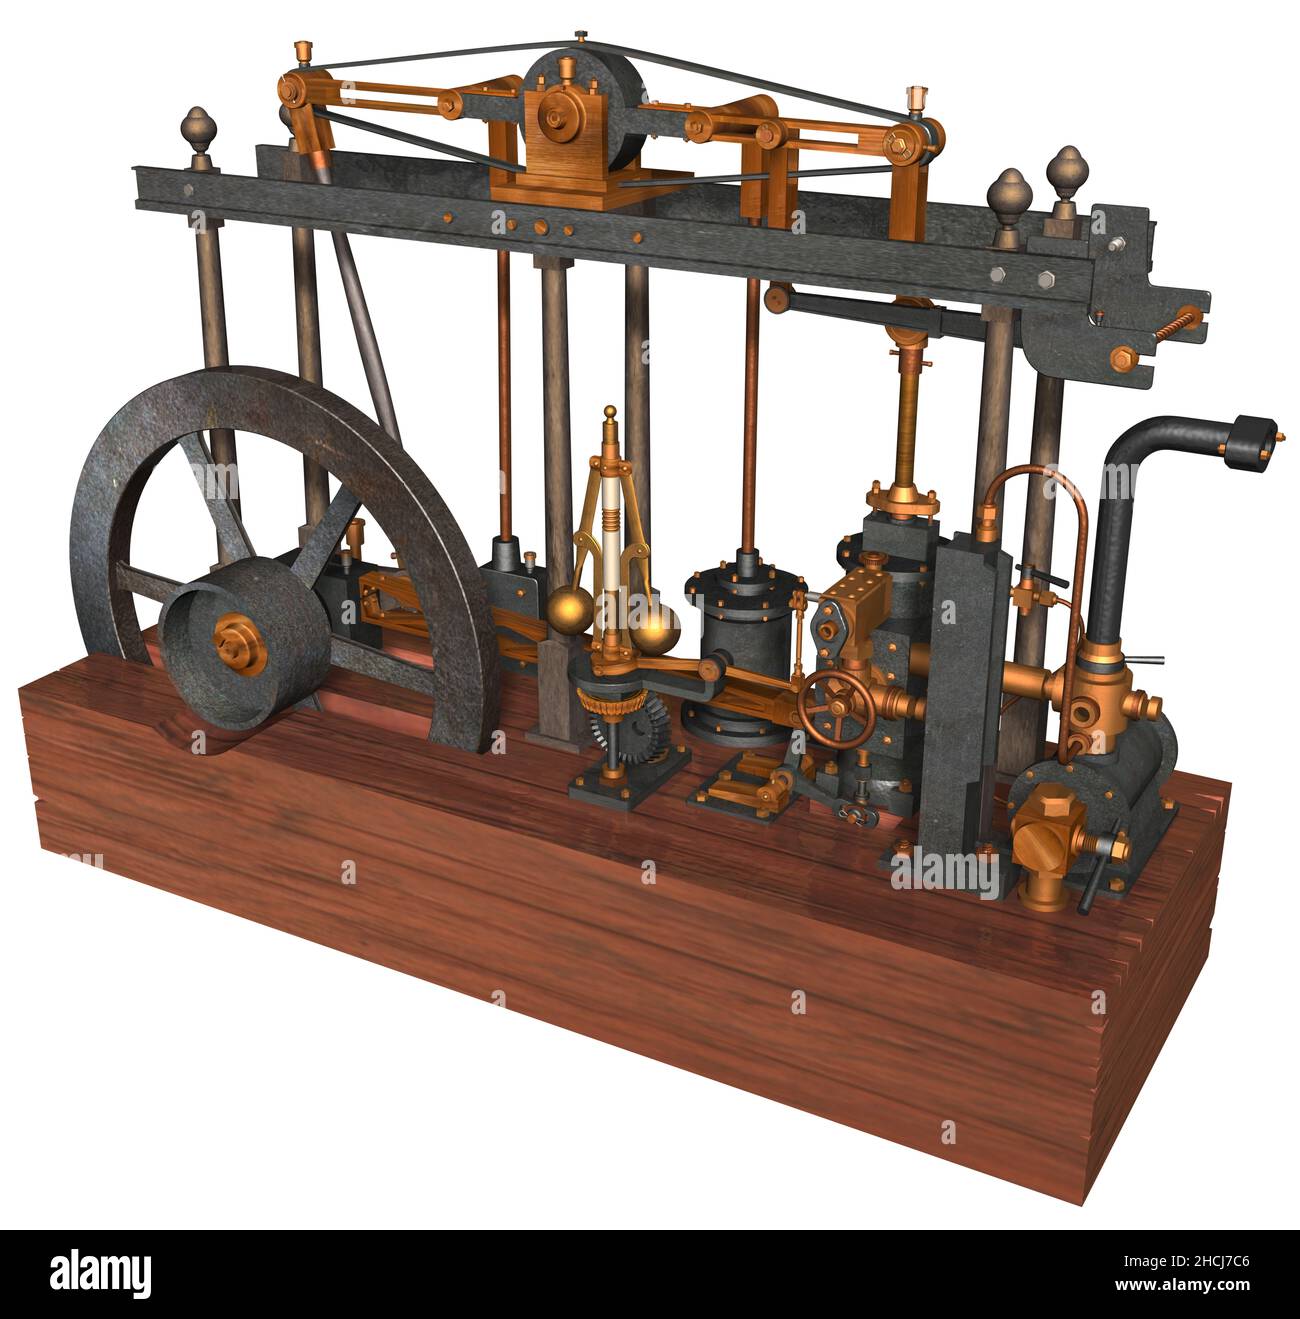 3D Rendering Illustration of a Steam Engine devised, built and perfected by Scottish inventor James Watt patented in 1769. Stock Photo